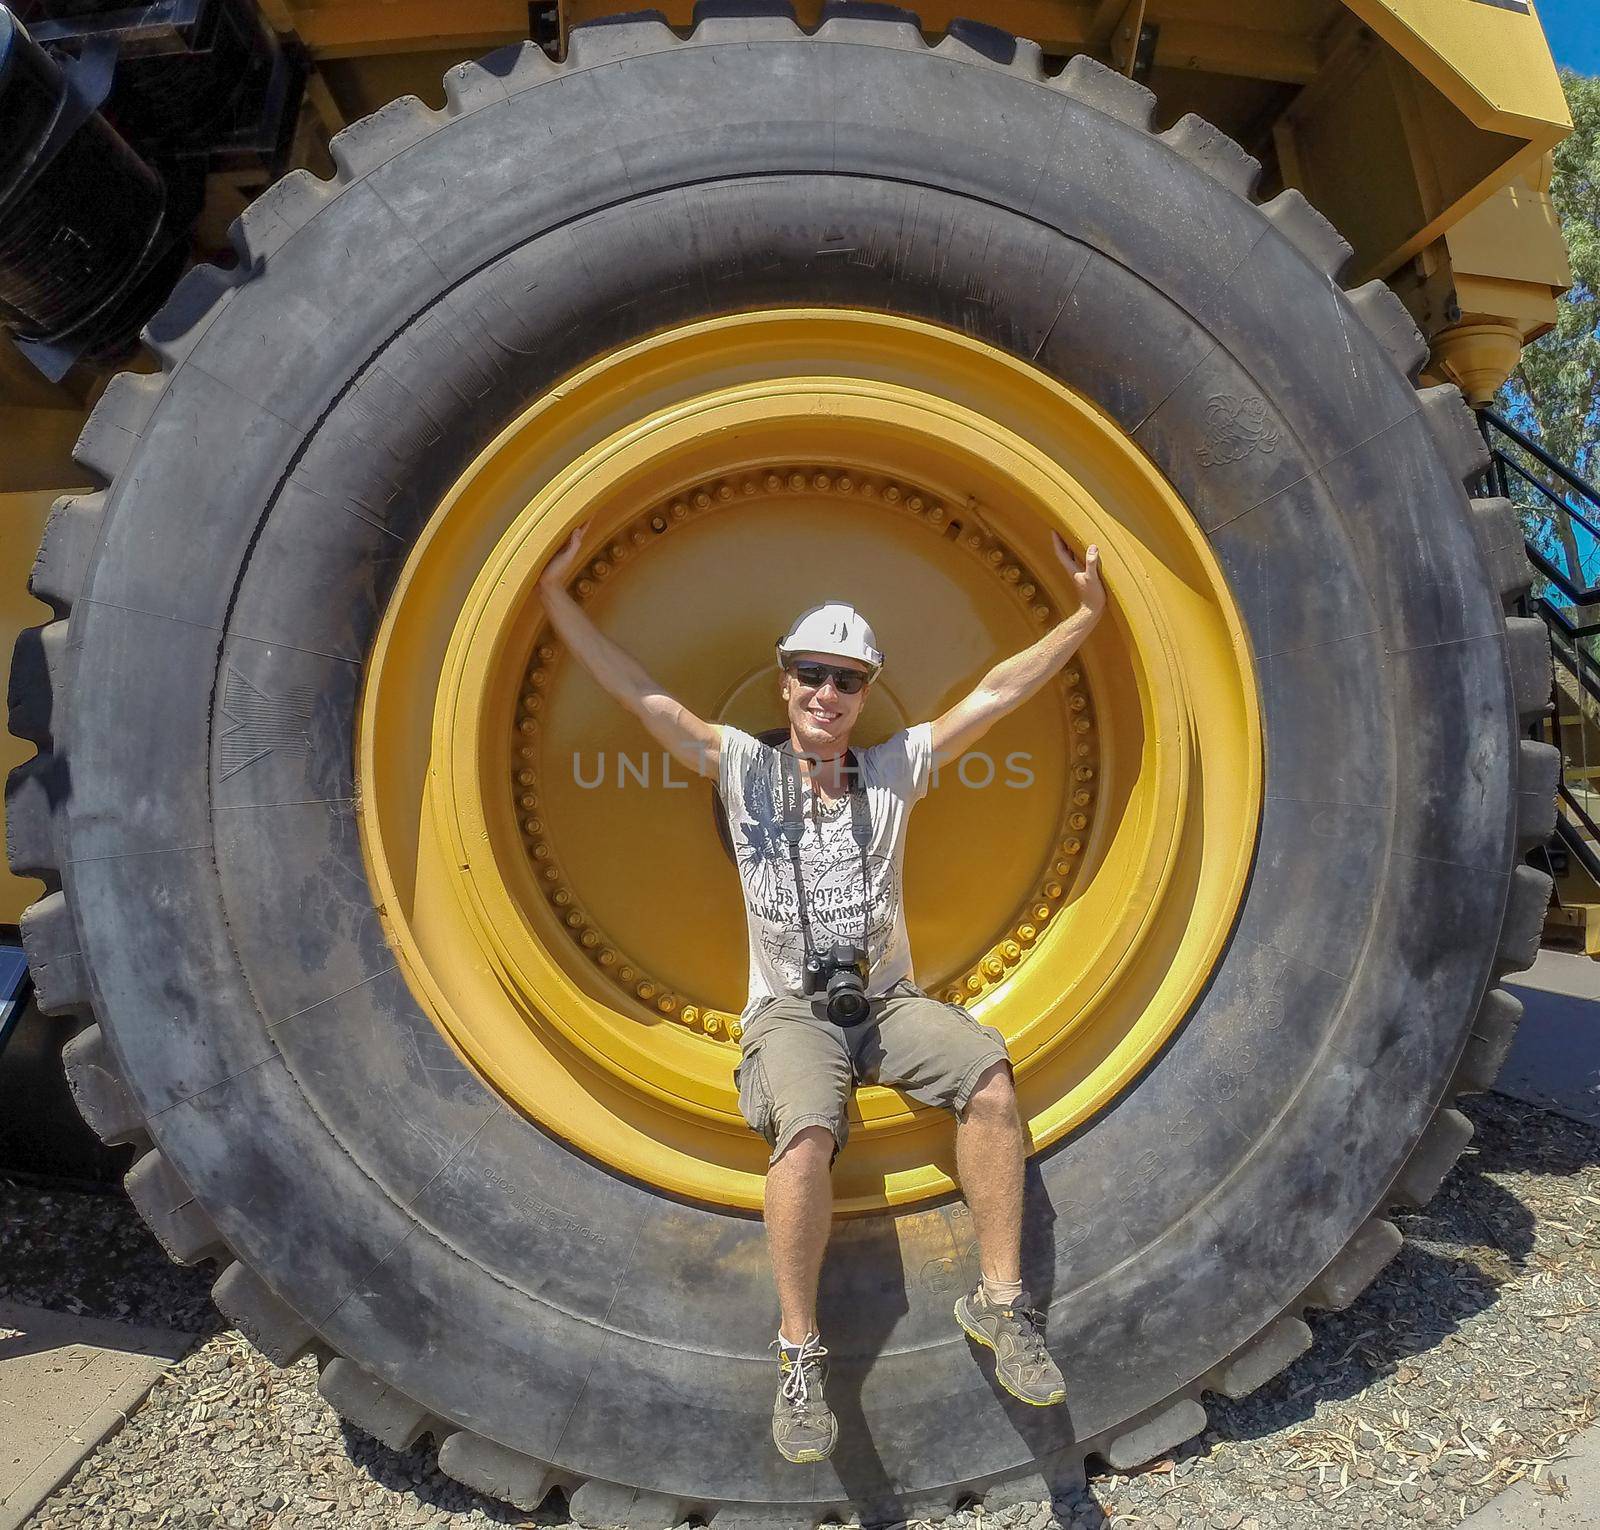 Tire of a earth moving dump truck with a man in the wheel for scale in australia by bettercallcurry